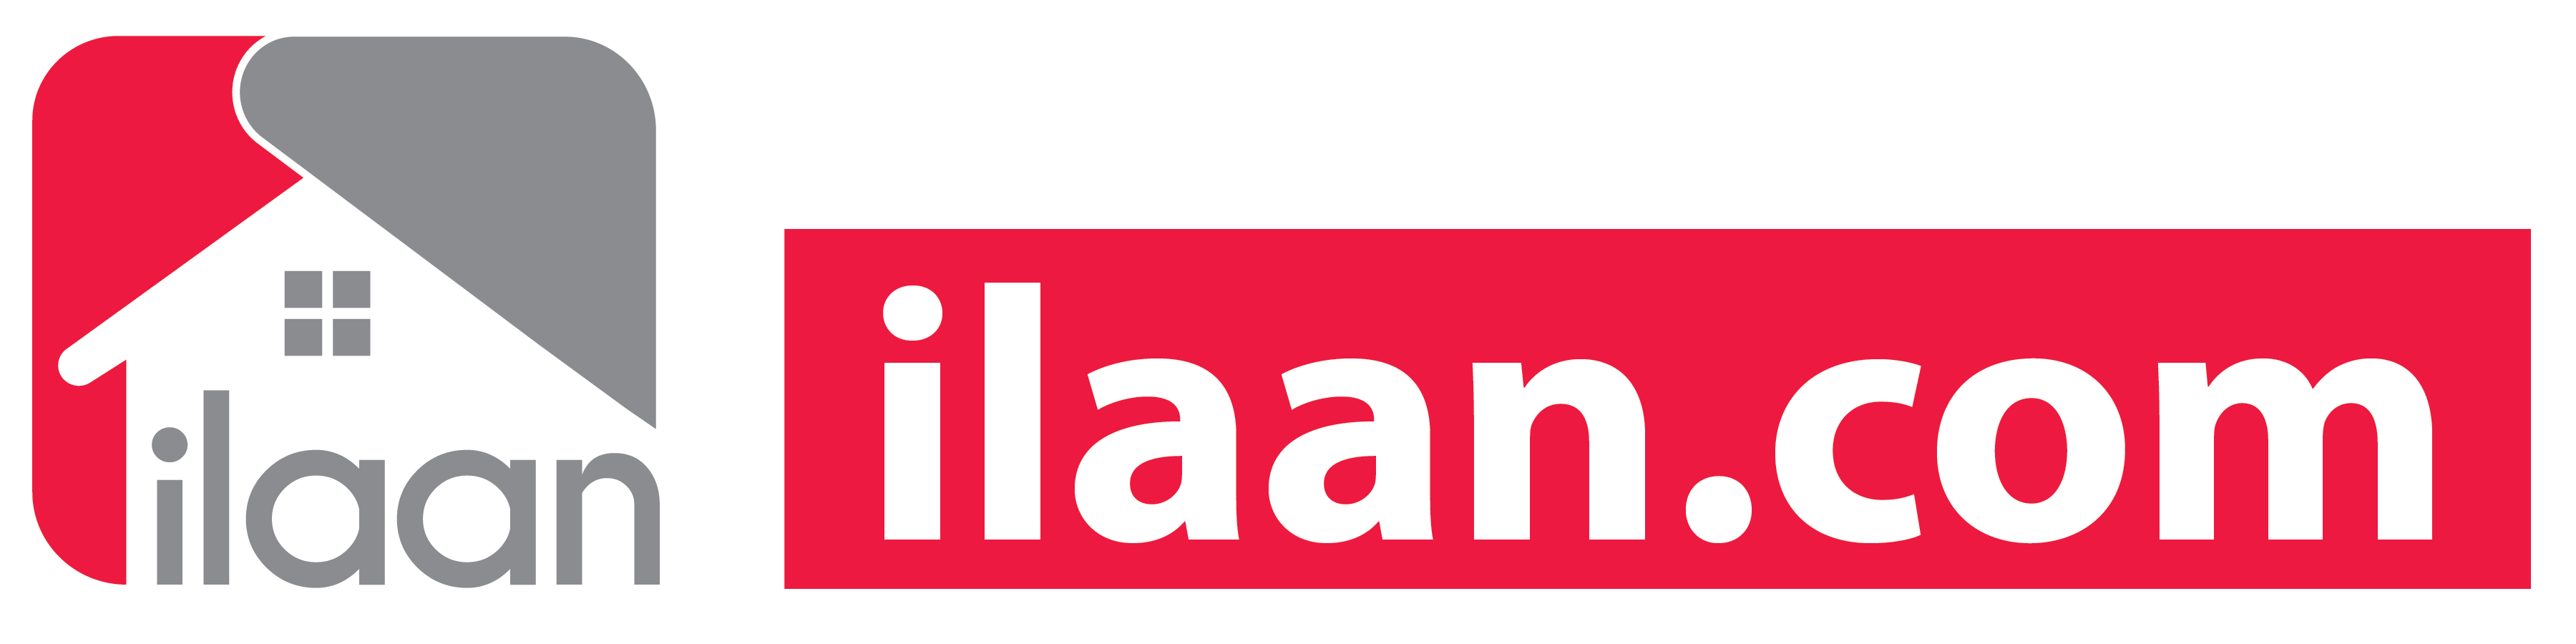 MArketed By Ilaan